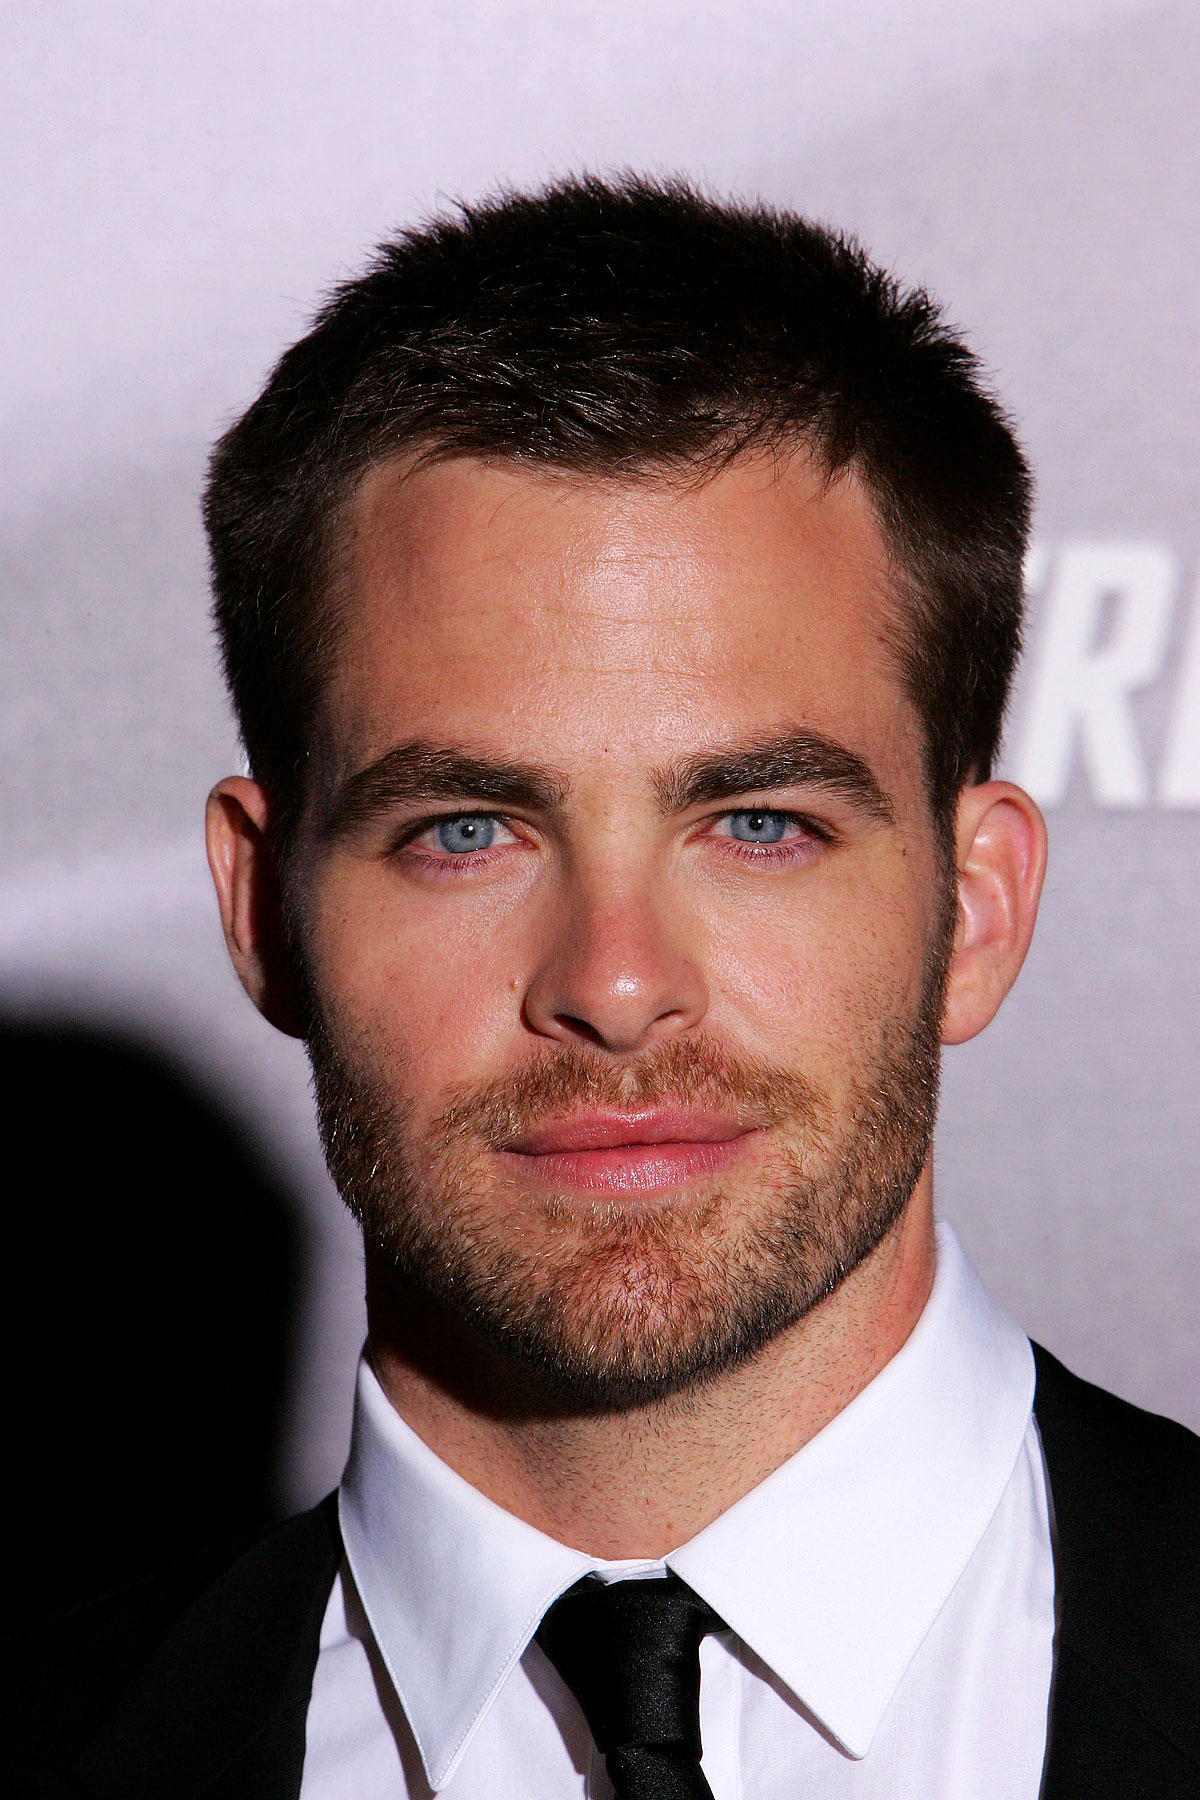 Chris Pine Defends His Single Tear at the 2015 Oscars [VIDEO]